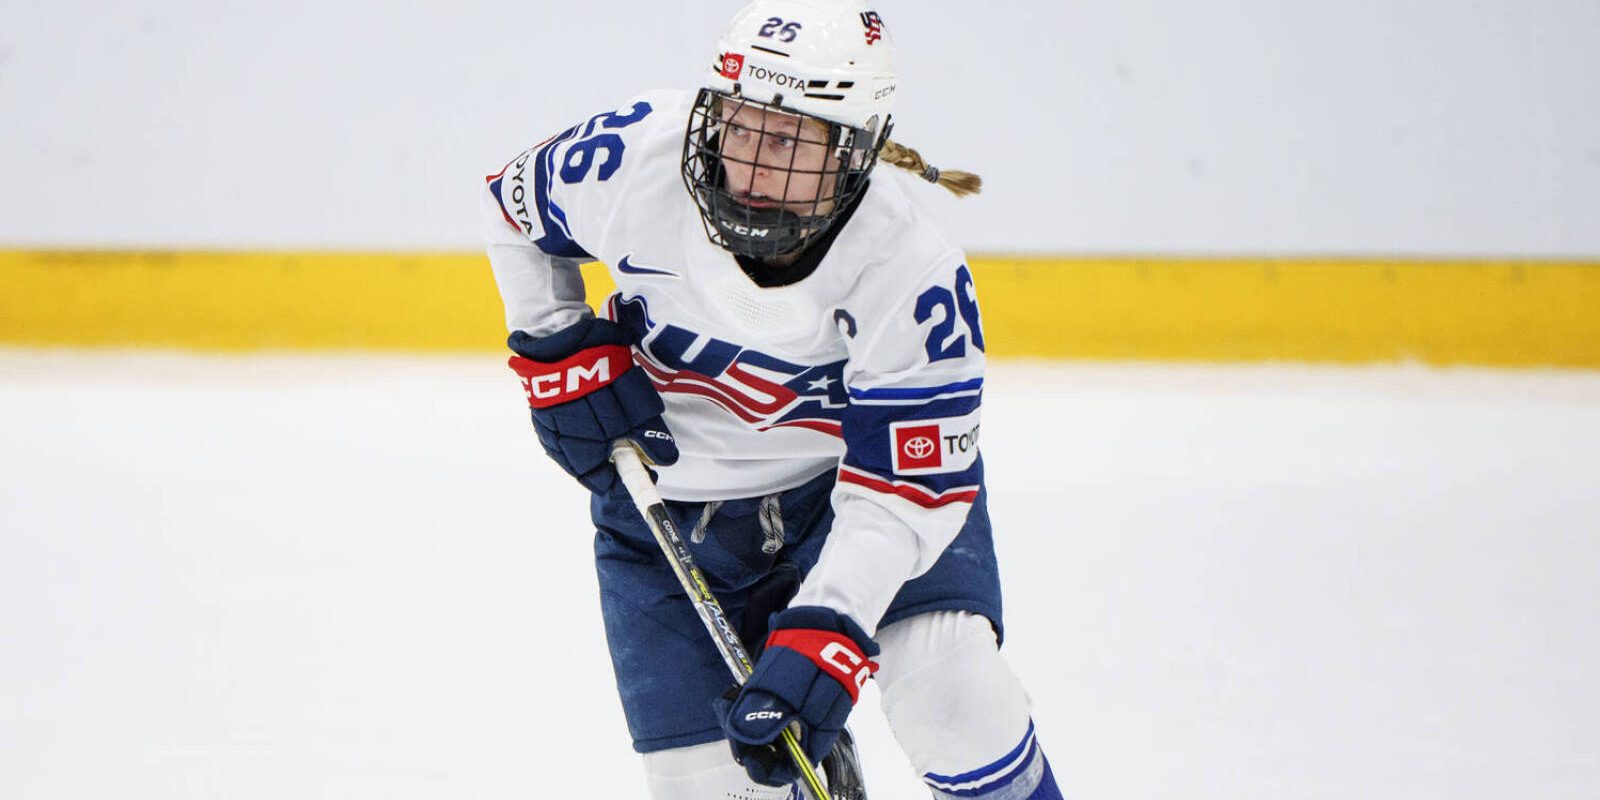 Kendall Coyne Schofield of USA in action during The IIHF World Championship Woman's ice hockey match between Canada and USA in Herning, Denmark, Tuesday, Aug 30, 2022.. (Foto: Bo Amstrup / Ritzau Scanpix/Ritzau Scanpix) (Photo by Ritzau Scanpix/Sipa USA)